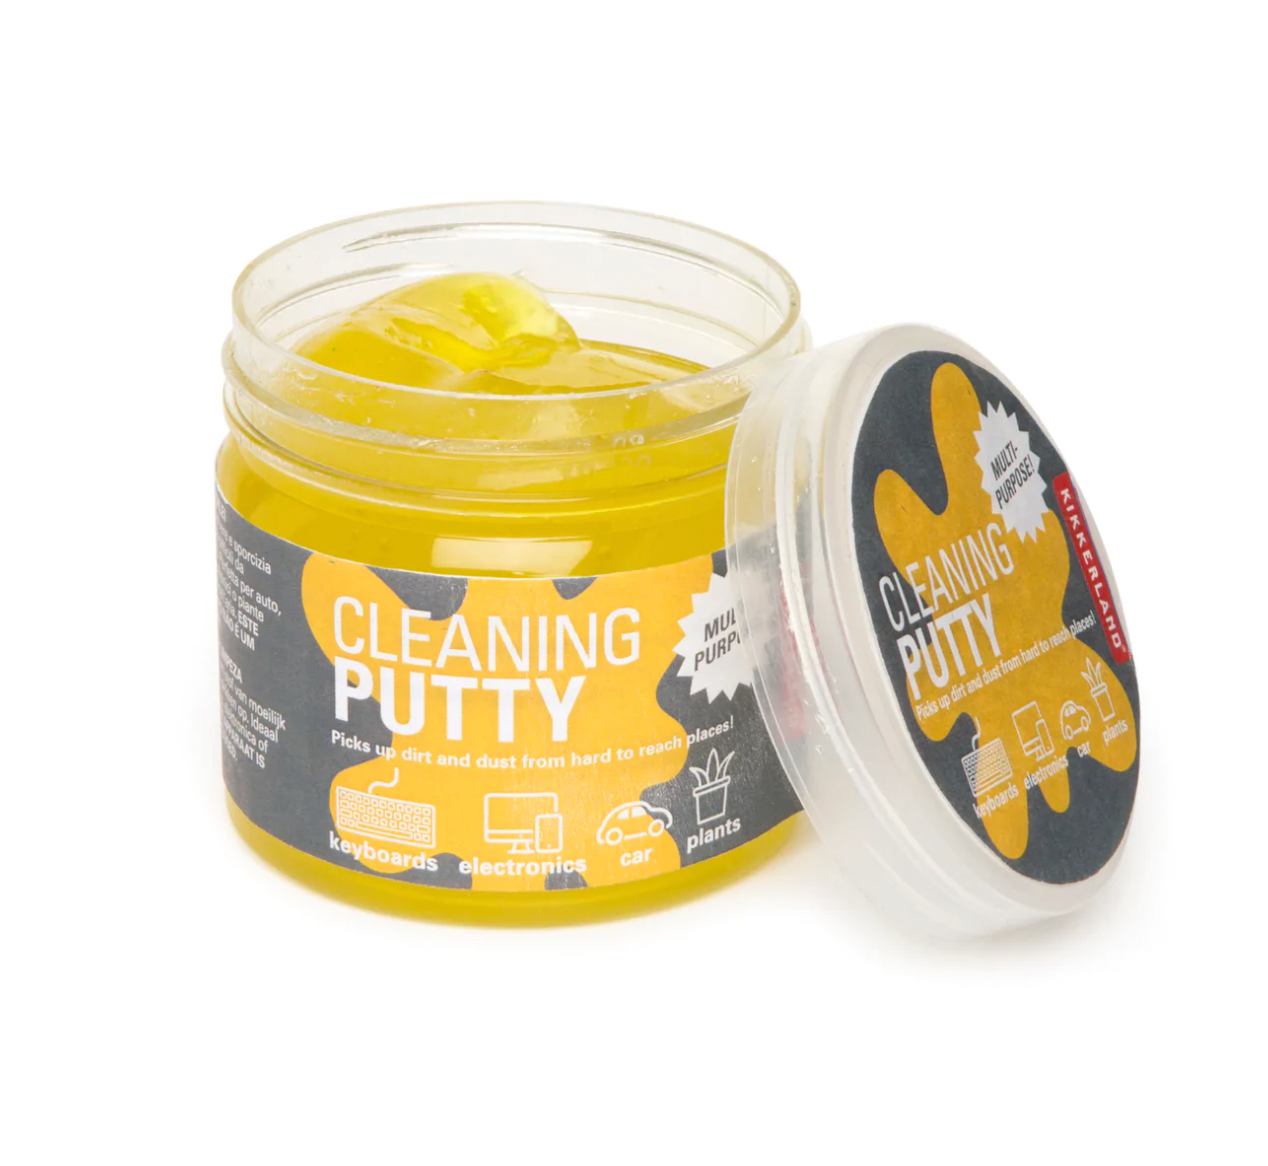 CLEANING PUTTY